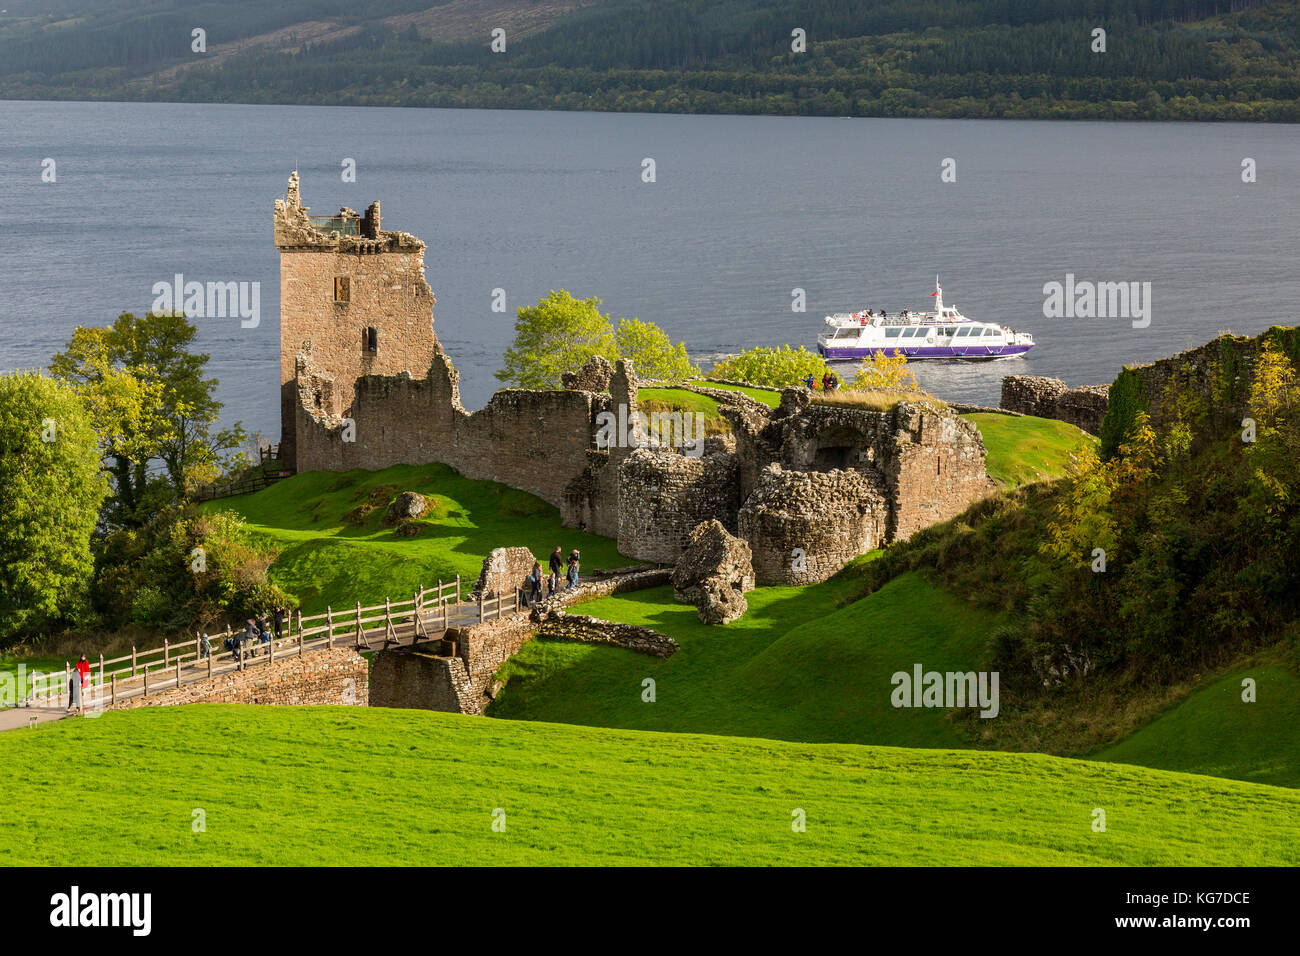 Urquhart Castle’s historic ruins on the banks of Loch Ness near Drumnadrochit, Highland, are now one of the most visited castles in Scotland. Stock Photo